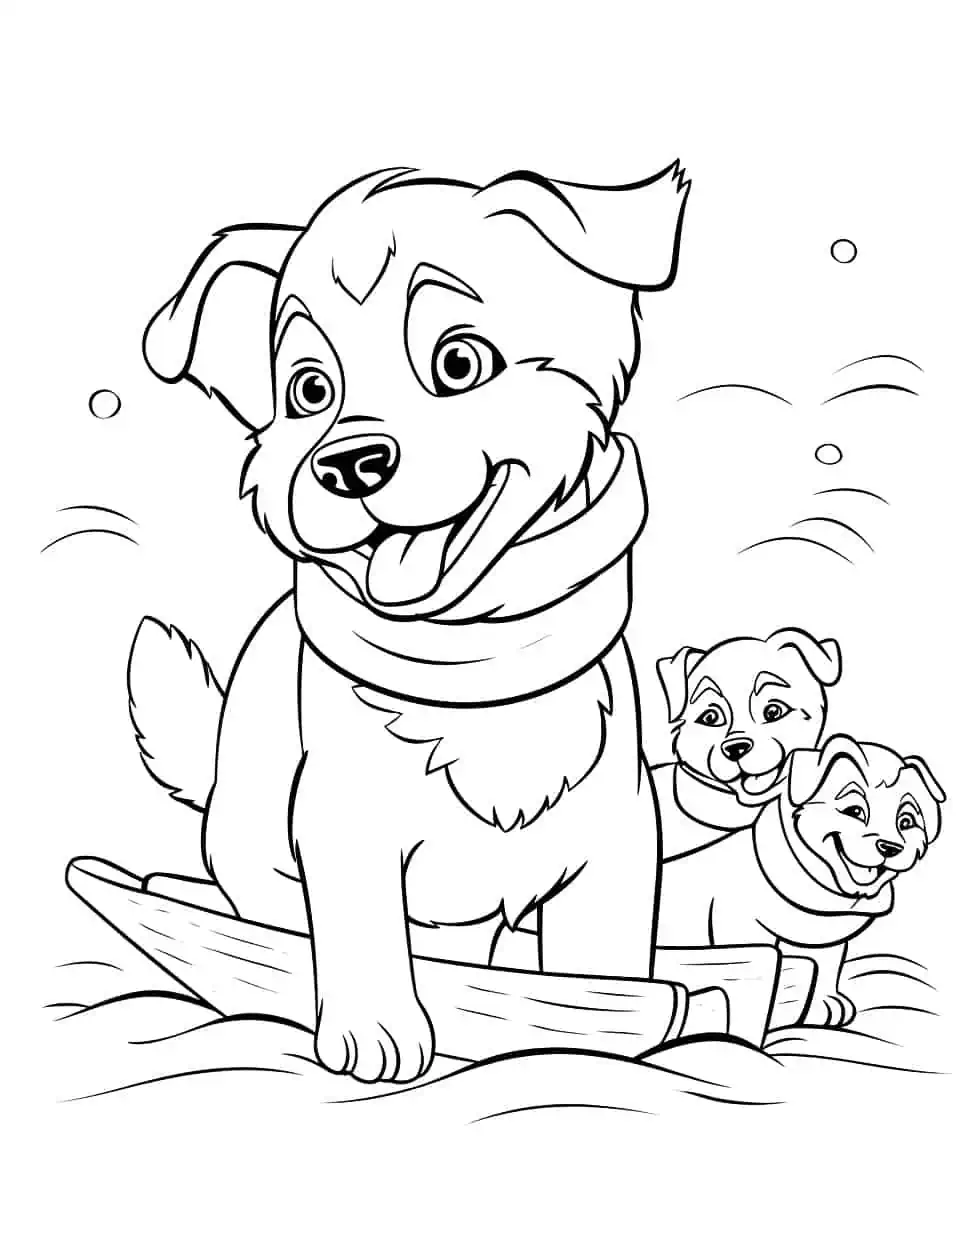 Sledding Husky Coloring Page - A group of Huskies pulling a sled in a snowy landscape.